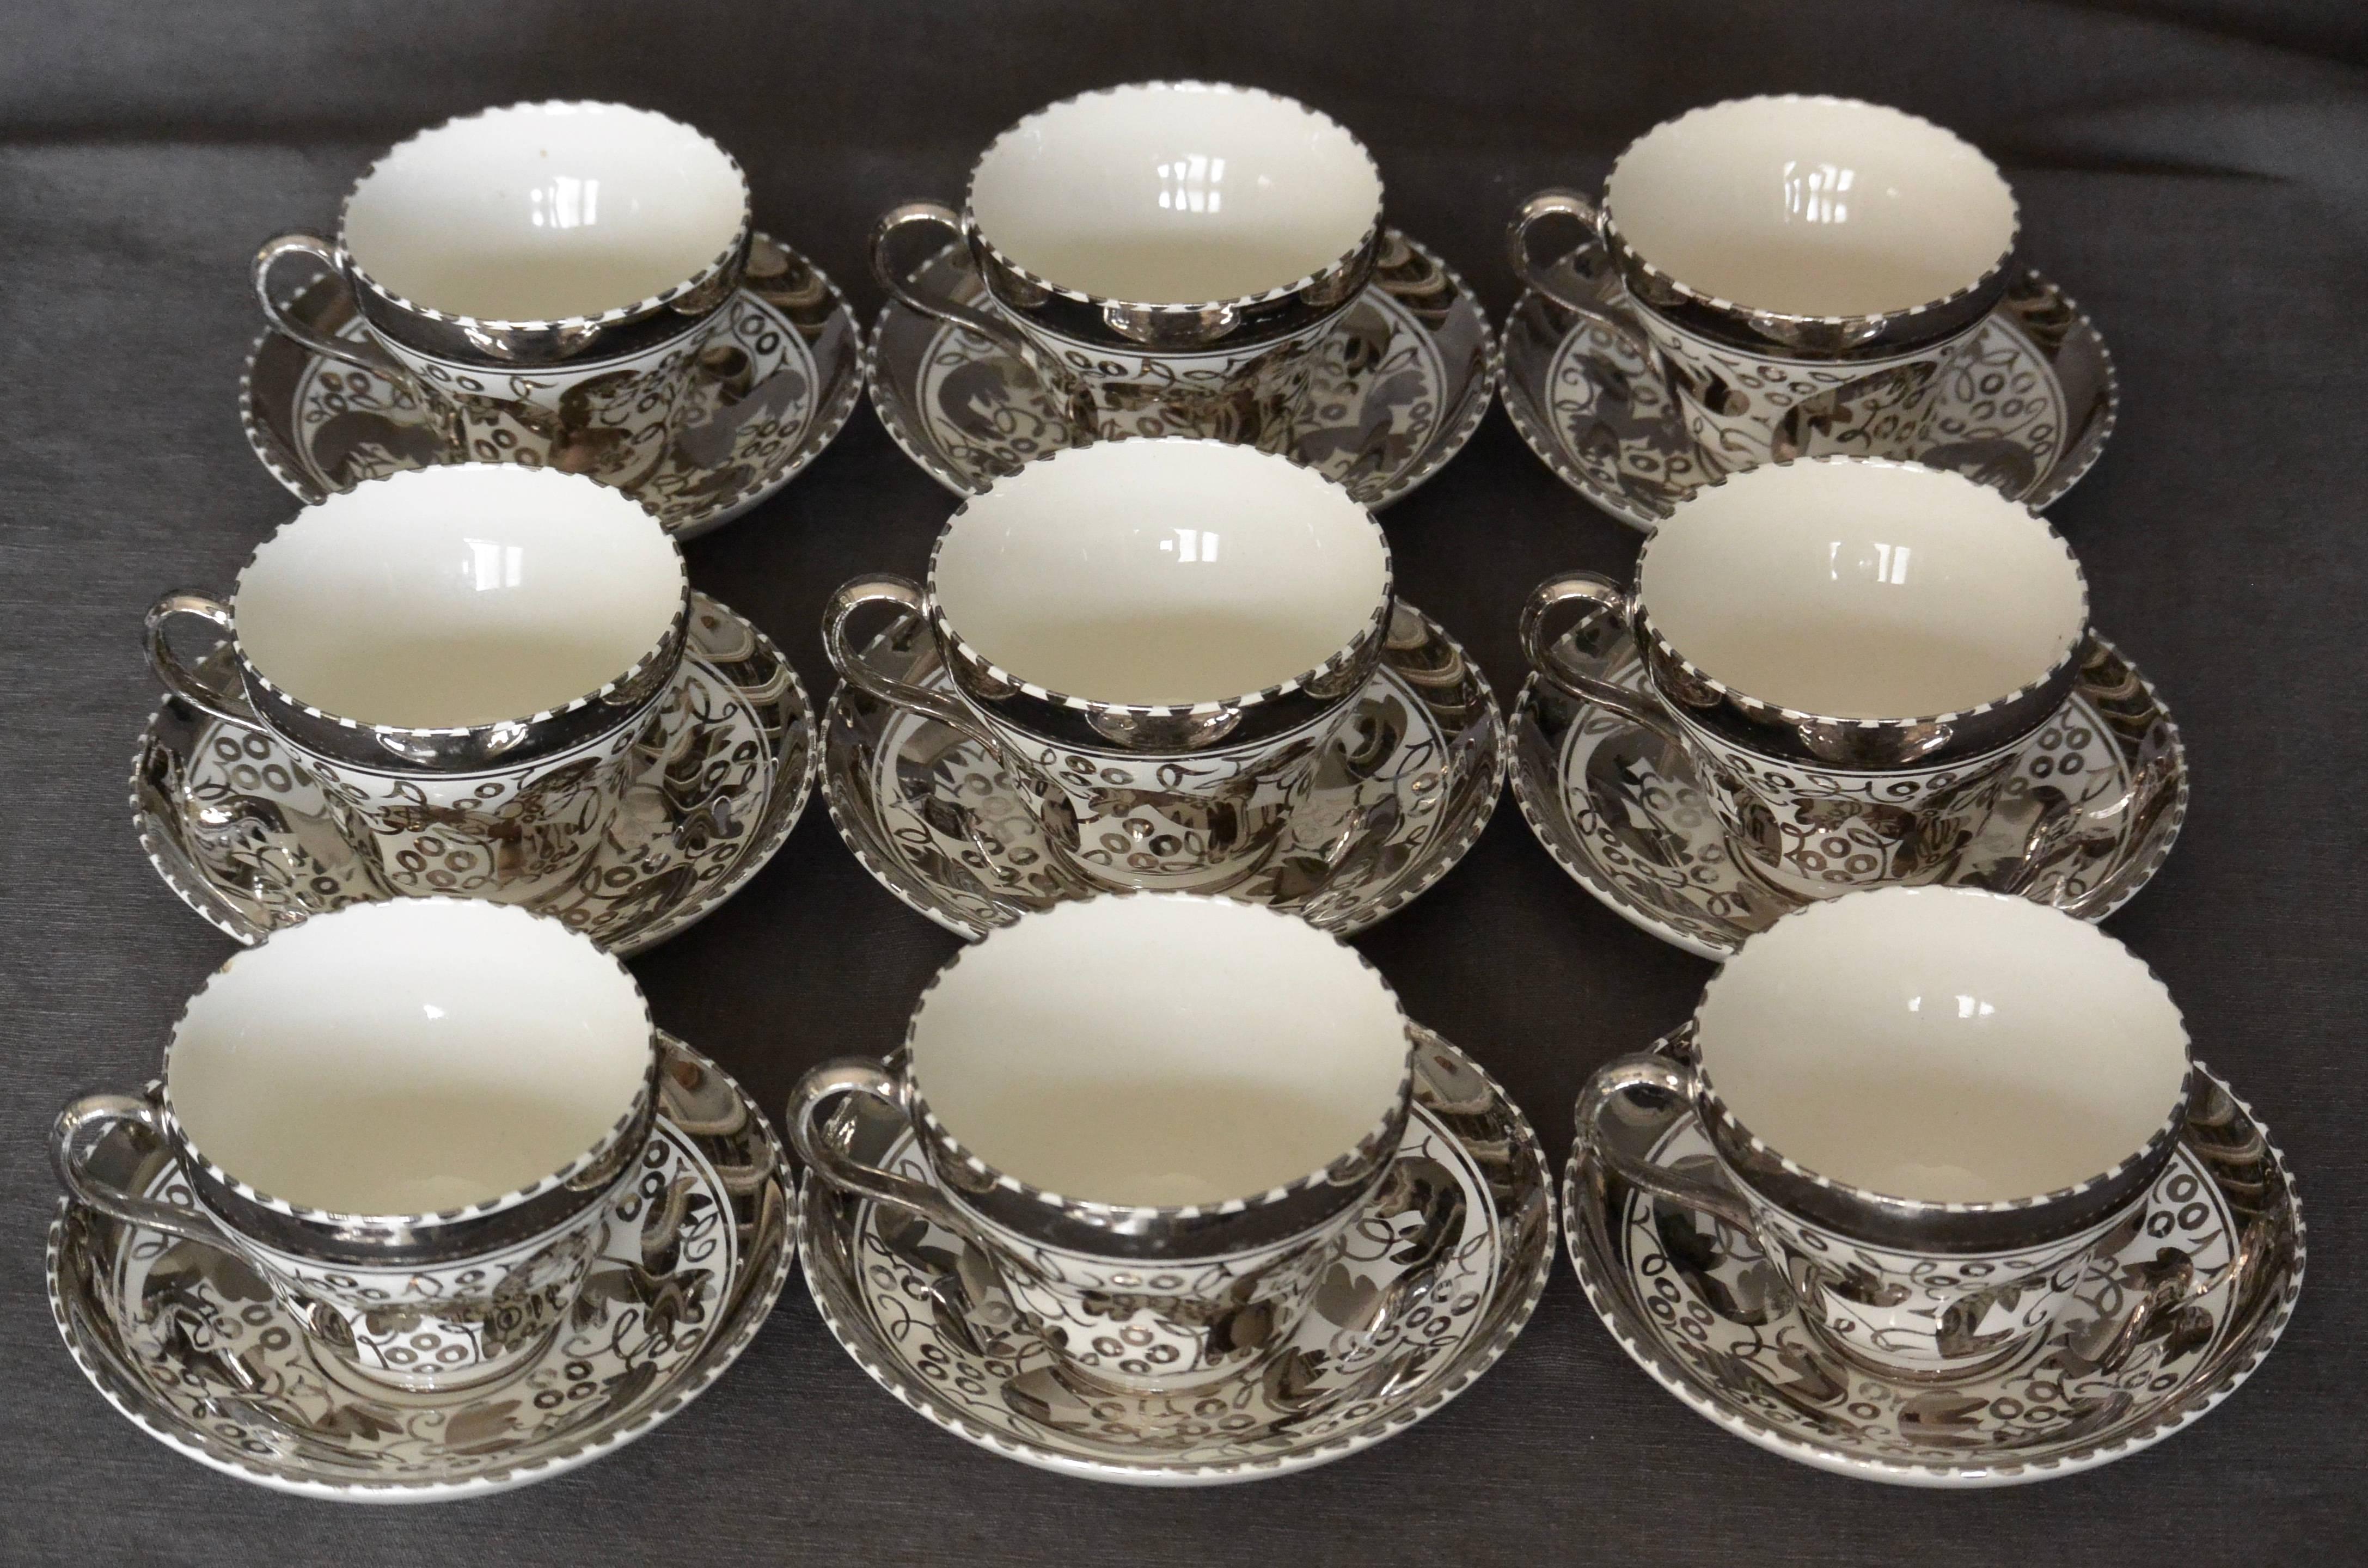 Set of nine vintage Wedgwood platinum cups and saucers in the original Amherst pattern. Cups and saucers with hand-painted platinum band and stylized grape leaf border. Impressed marks for Wedgwood, England, circa 1929
Dimensions: cup 2.5” H x 3.5”